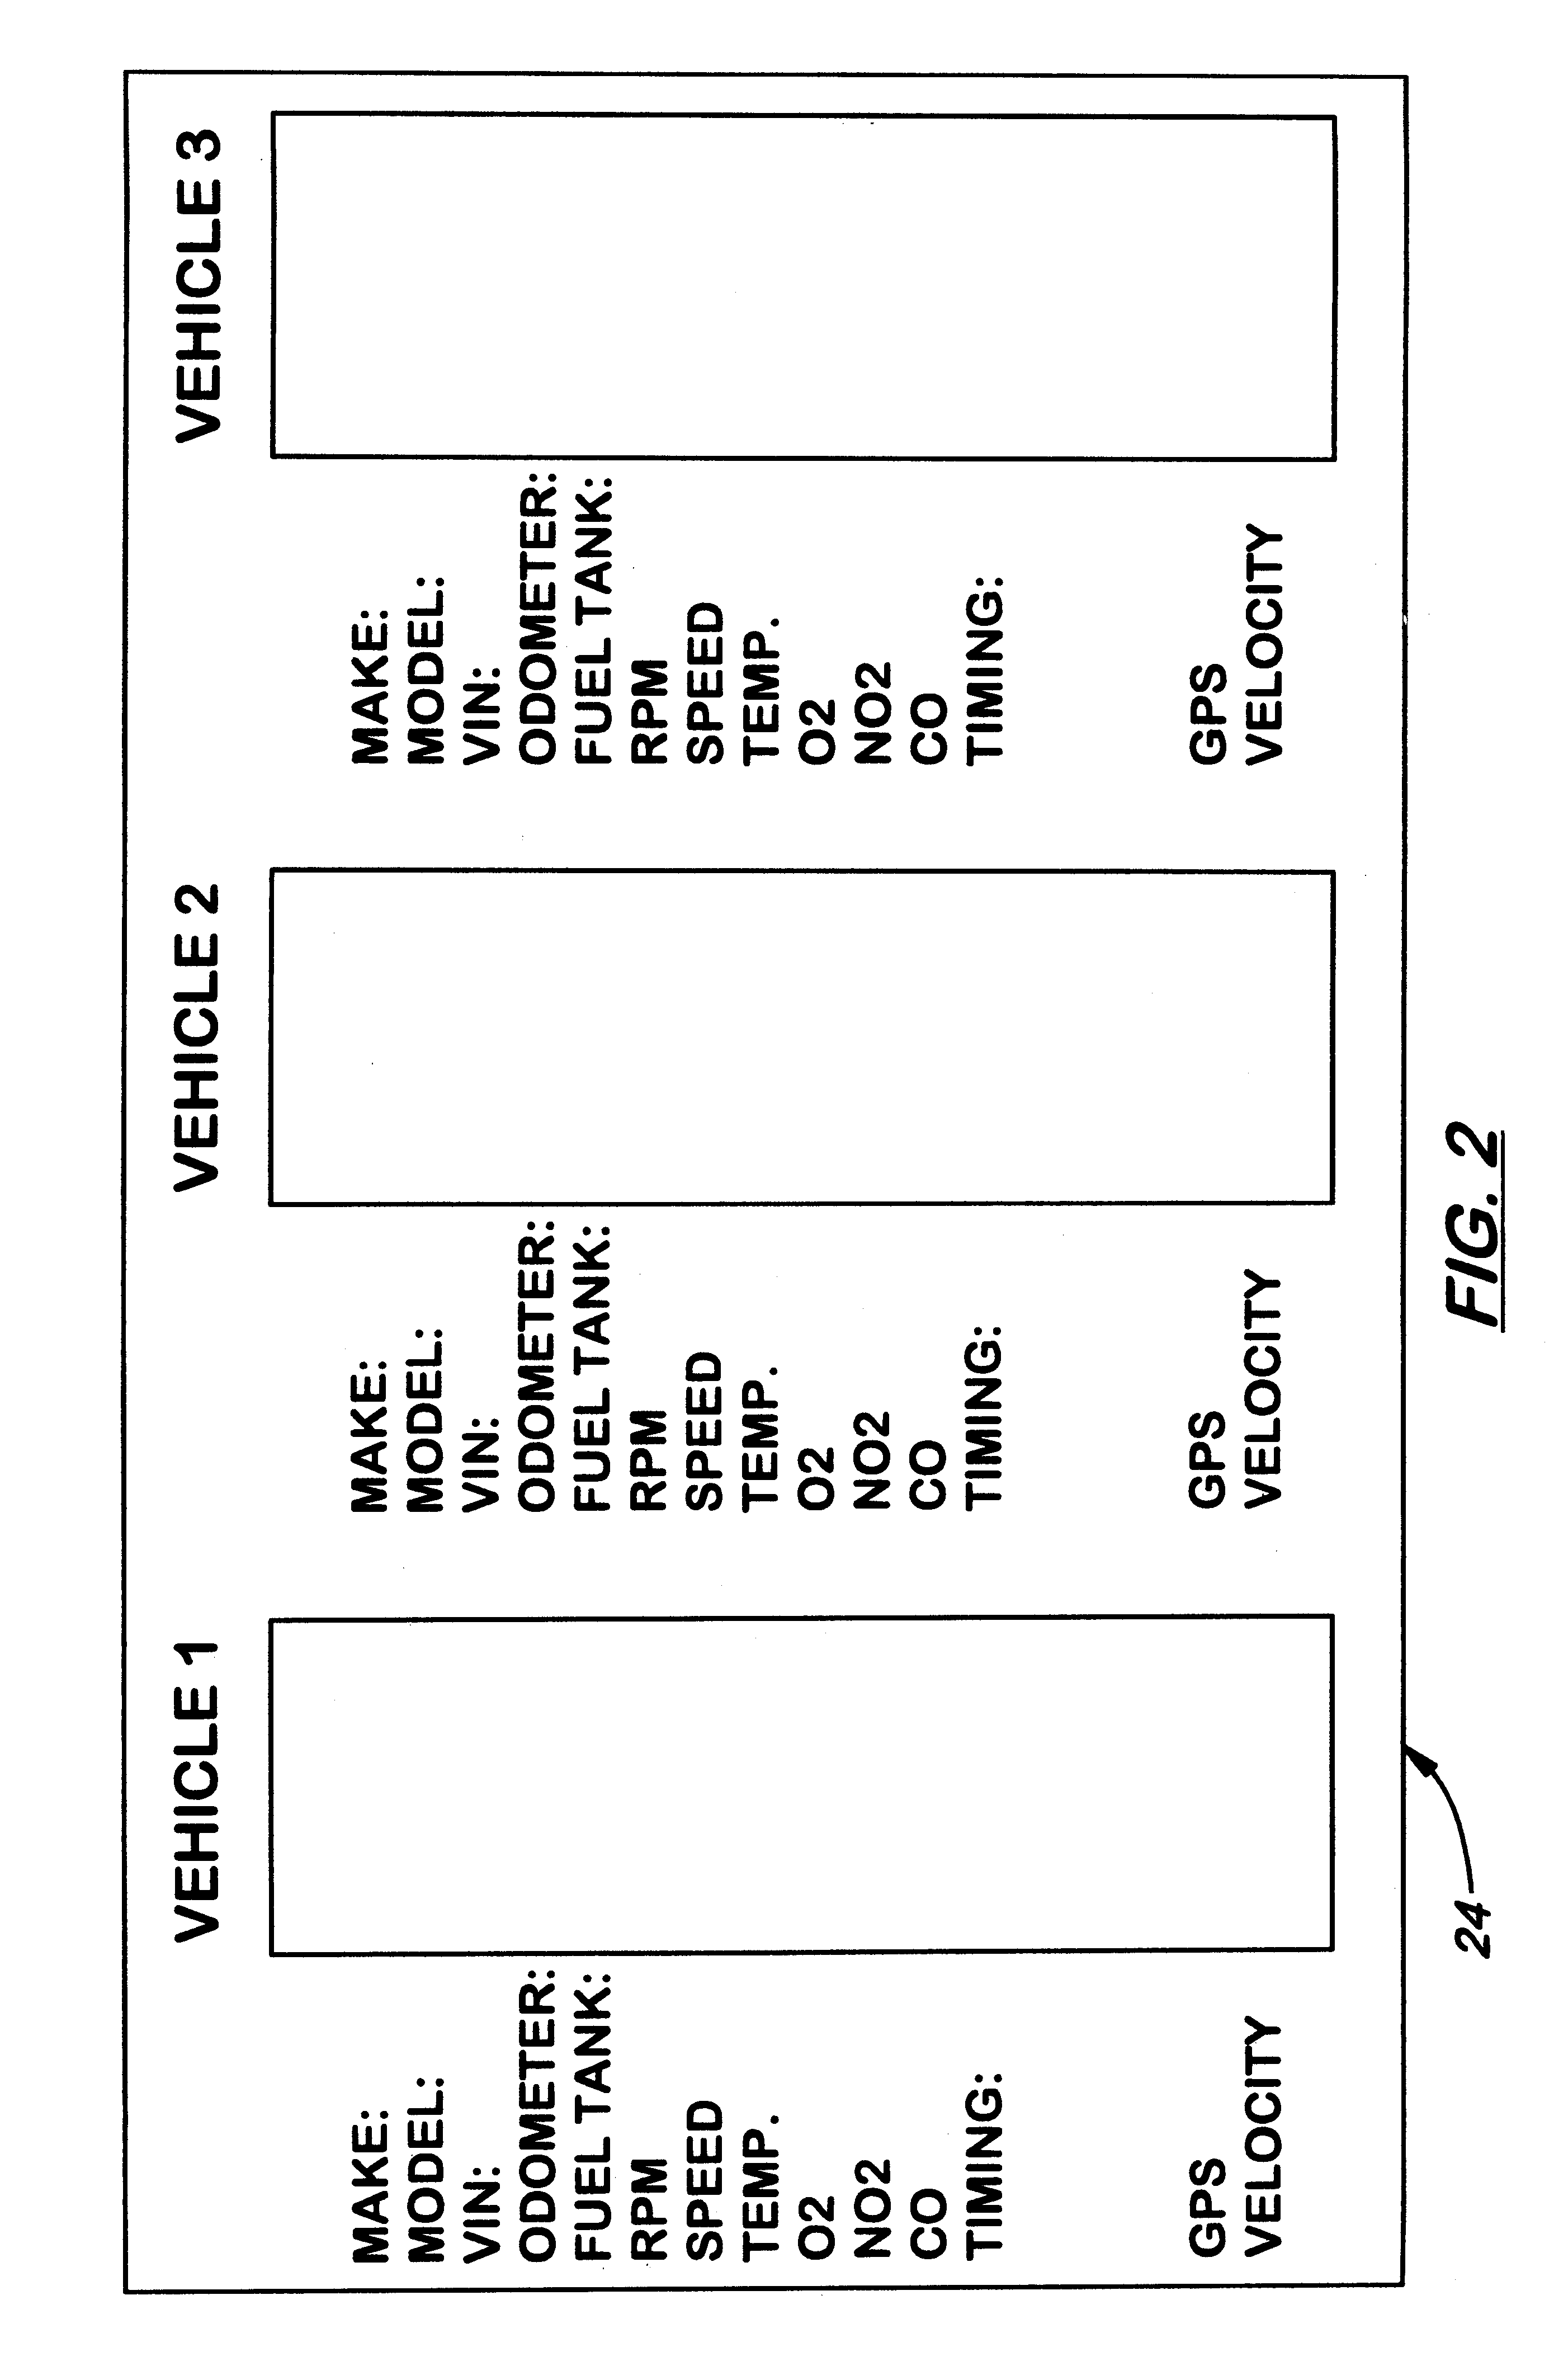 System for transmitting and displaying multiple, motor vehicle information